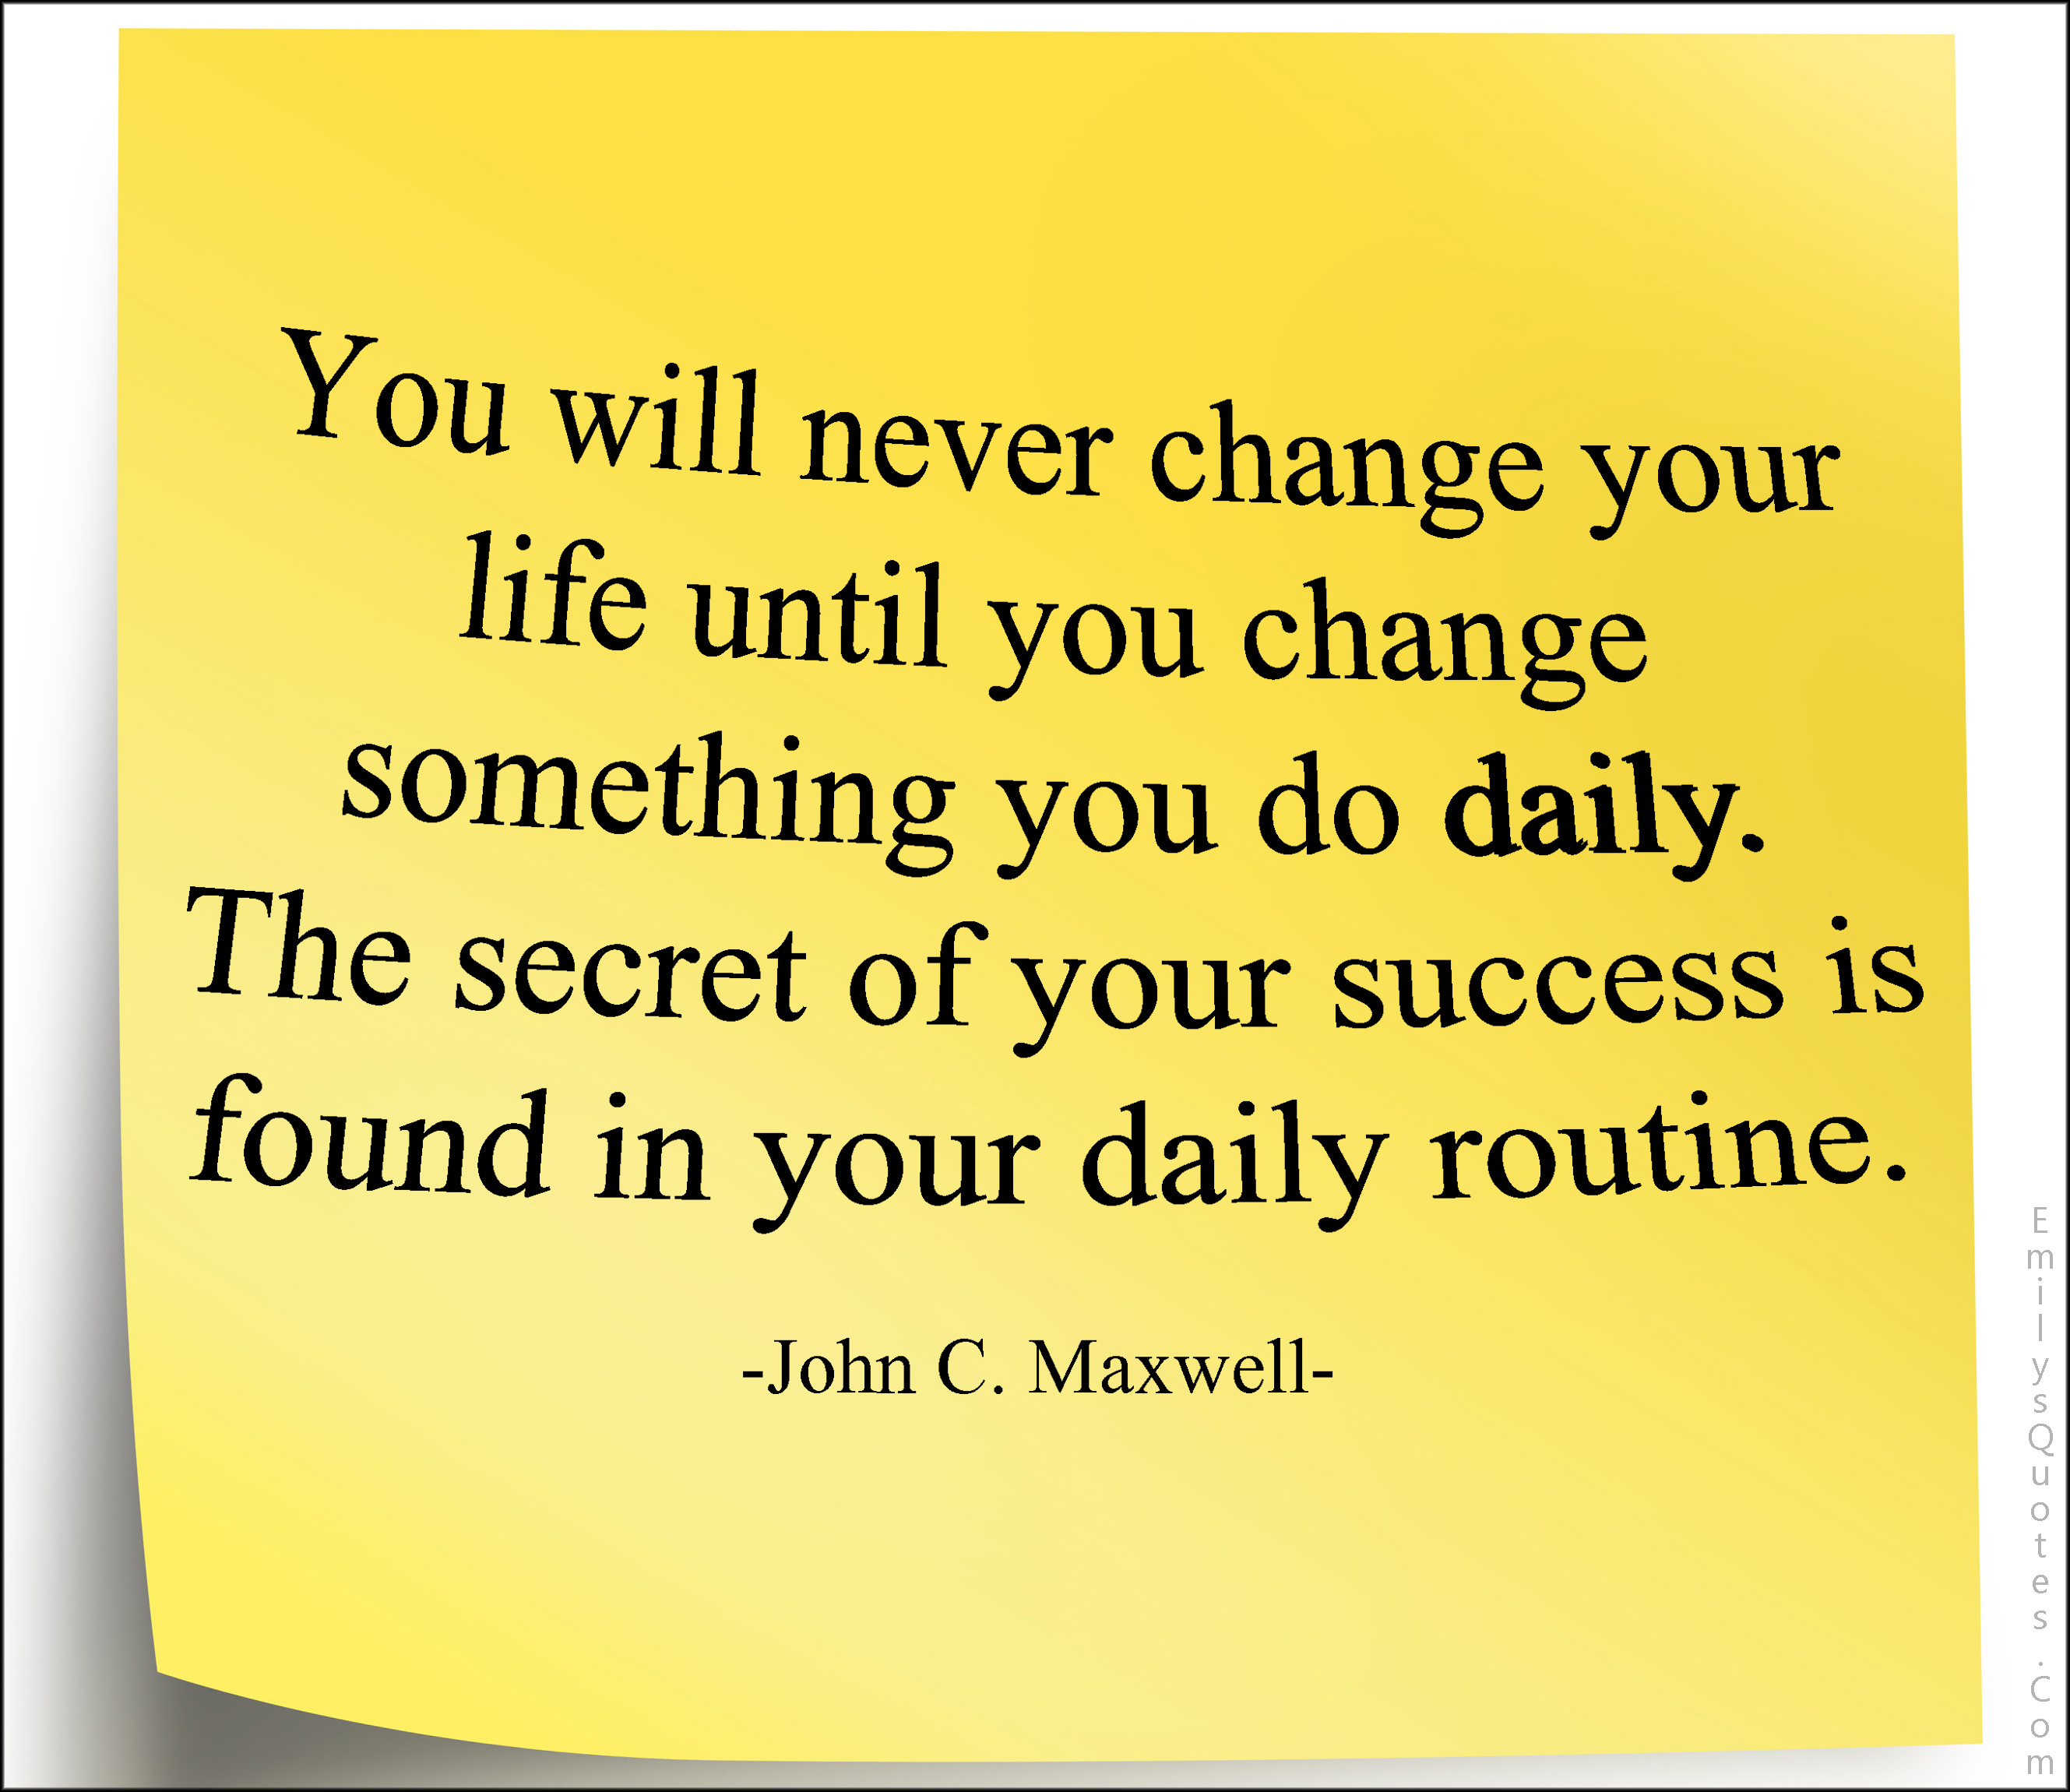 You will never change your life until you change something you do daily. The secret of your success is found in your daily routine